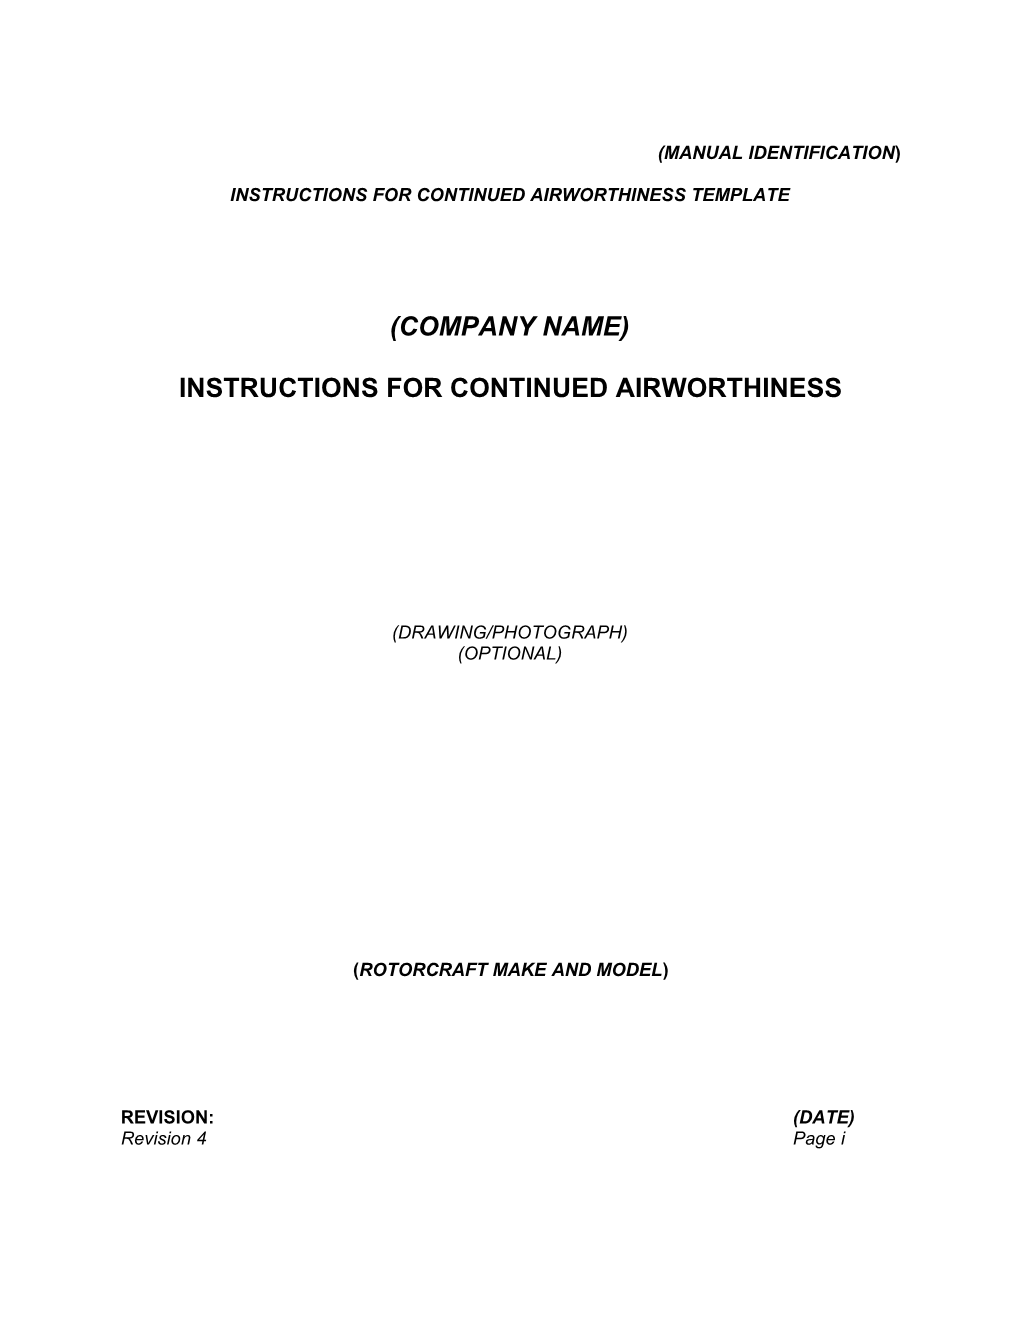 Instructions for Continued Airworthiness Template